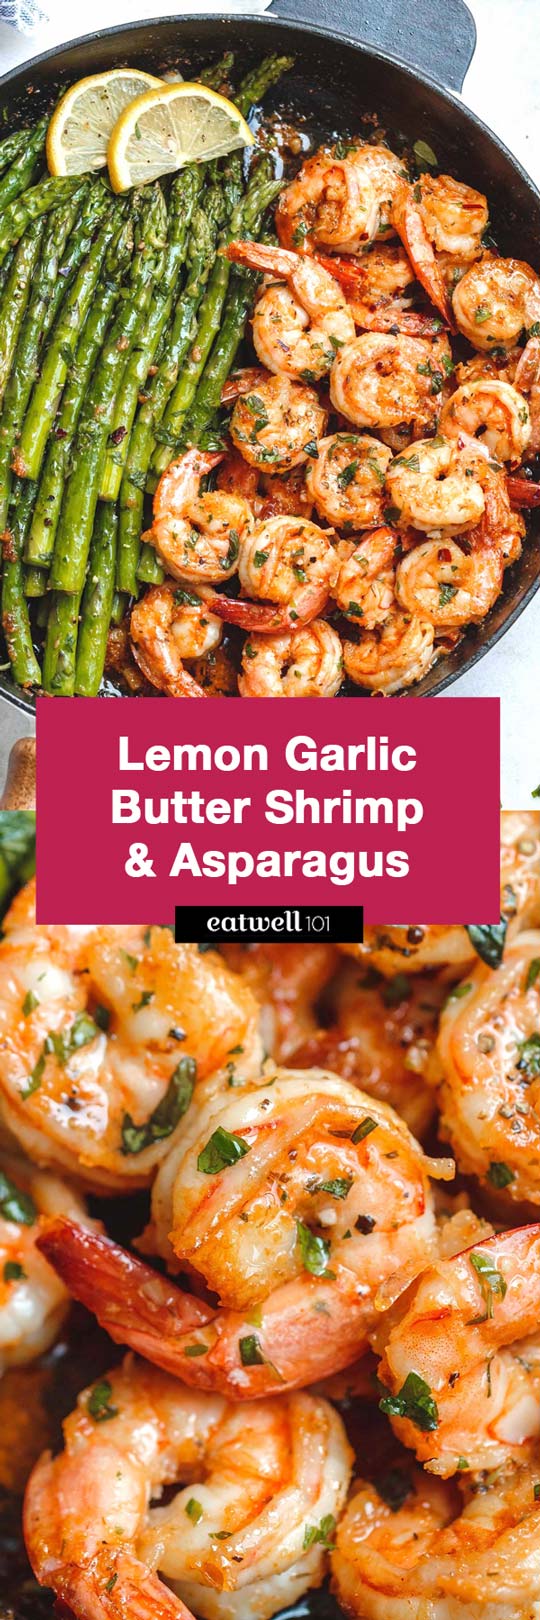 Lemon Garlic Butter Shrimp Recipe with Asparagus - #eatwell101 #recipe - So much flavor and so easy to throw together, this #shrimp #dinner is a winner!